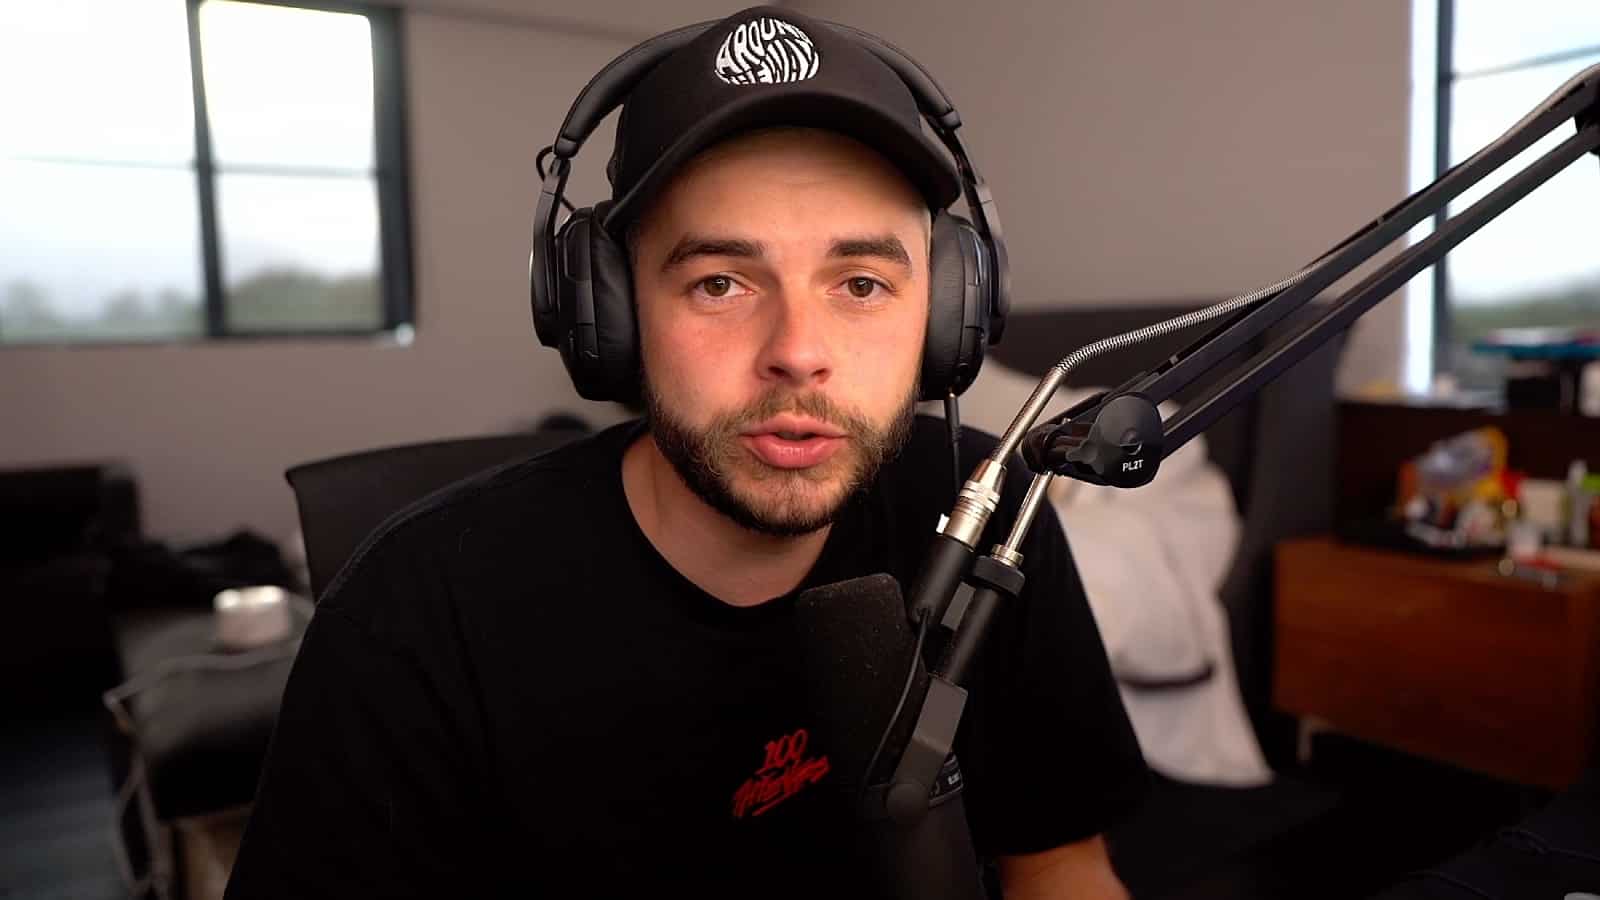 Nadeshot on 100 Thieves not caring about winning